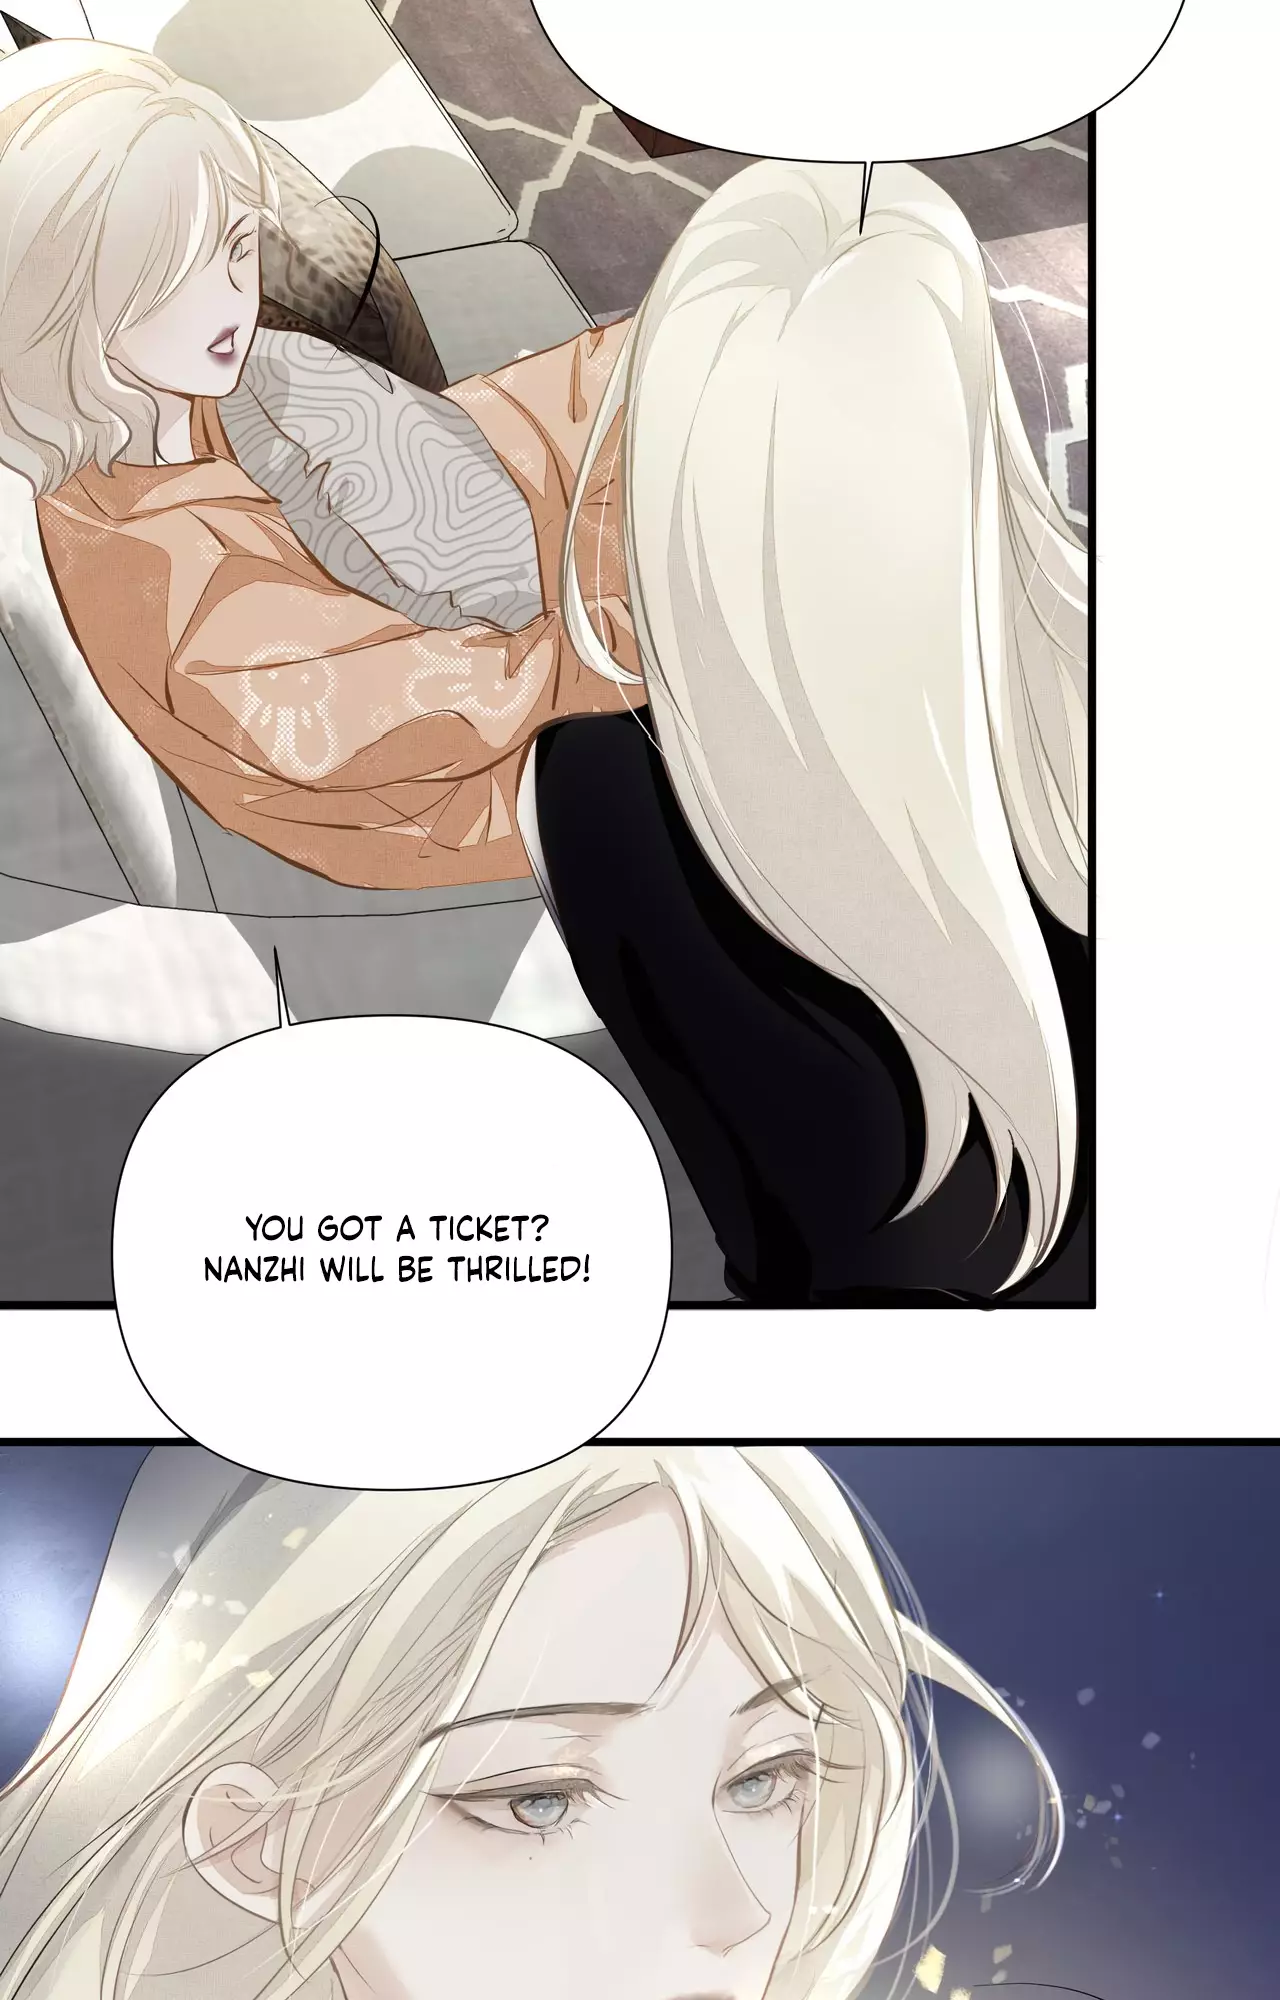 Addicted To Her - 6 page 28-19c7e932